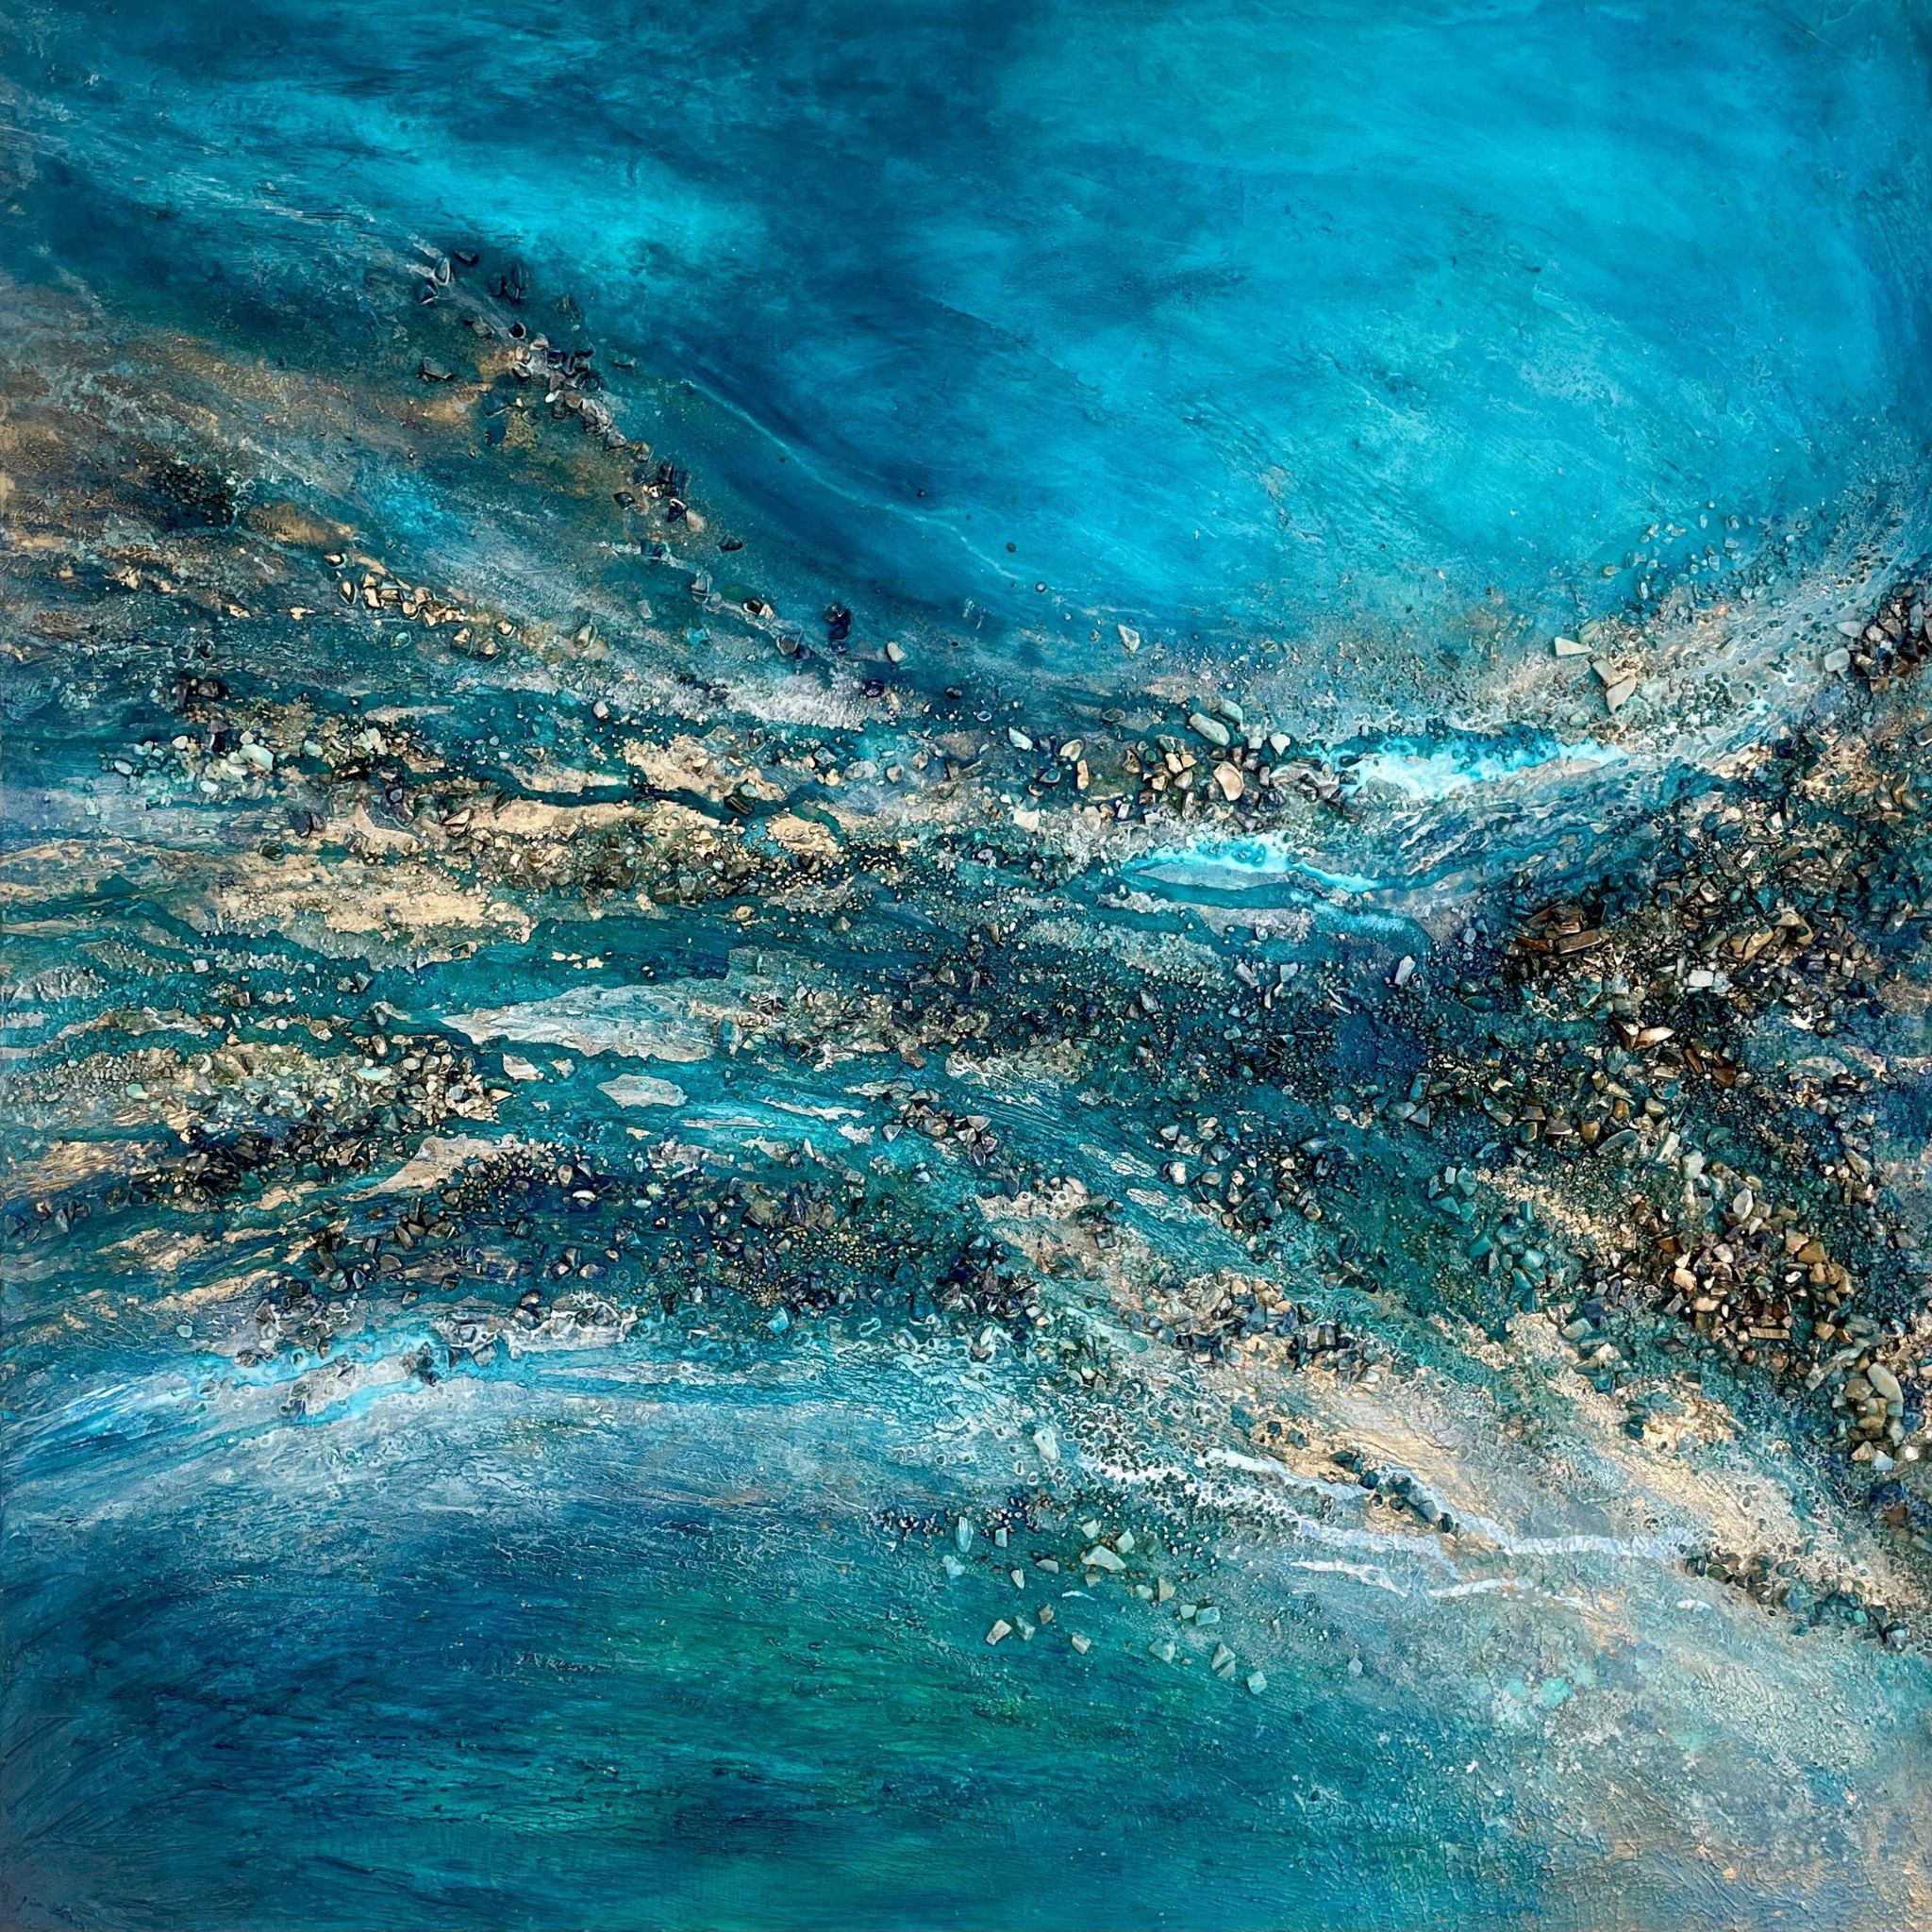 Water's Littoral, by Laura Callaghan